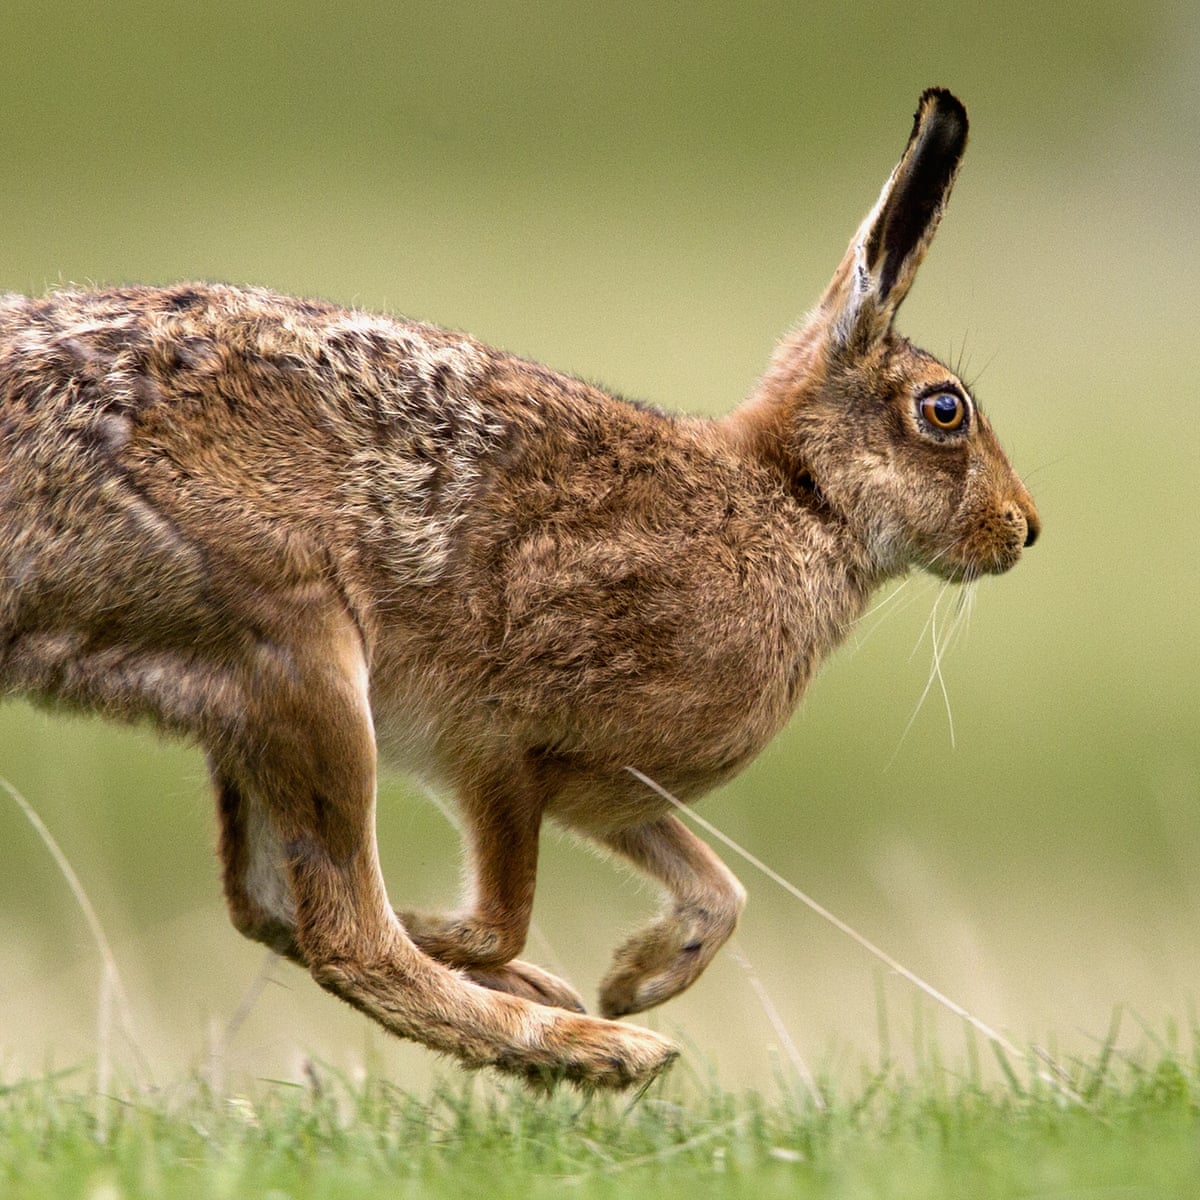 Leap of faith: ancient Britons viewed hares and chickens as gods | Animals  | The Guardian